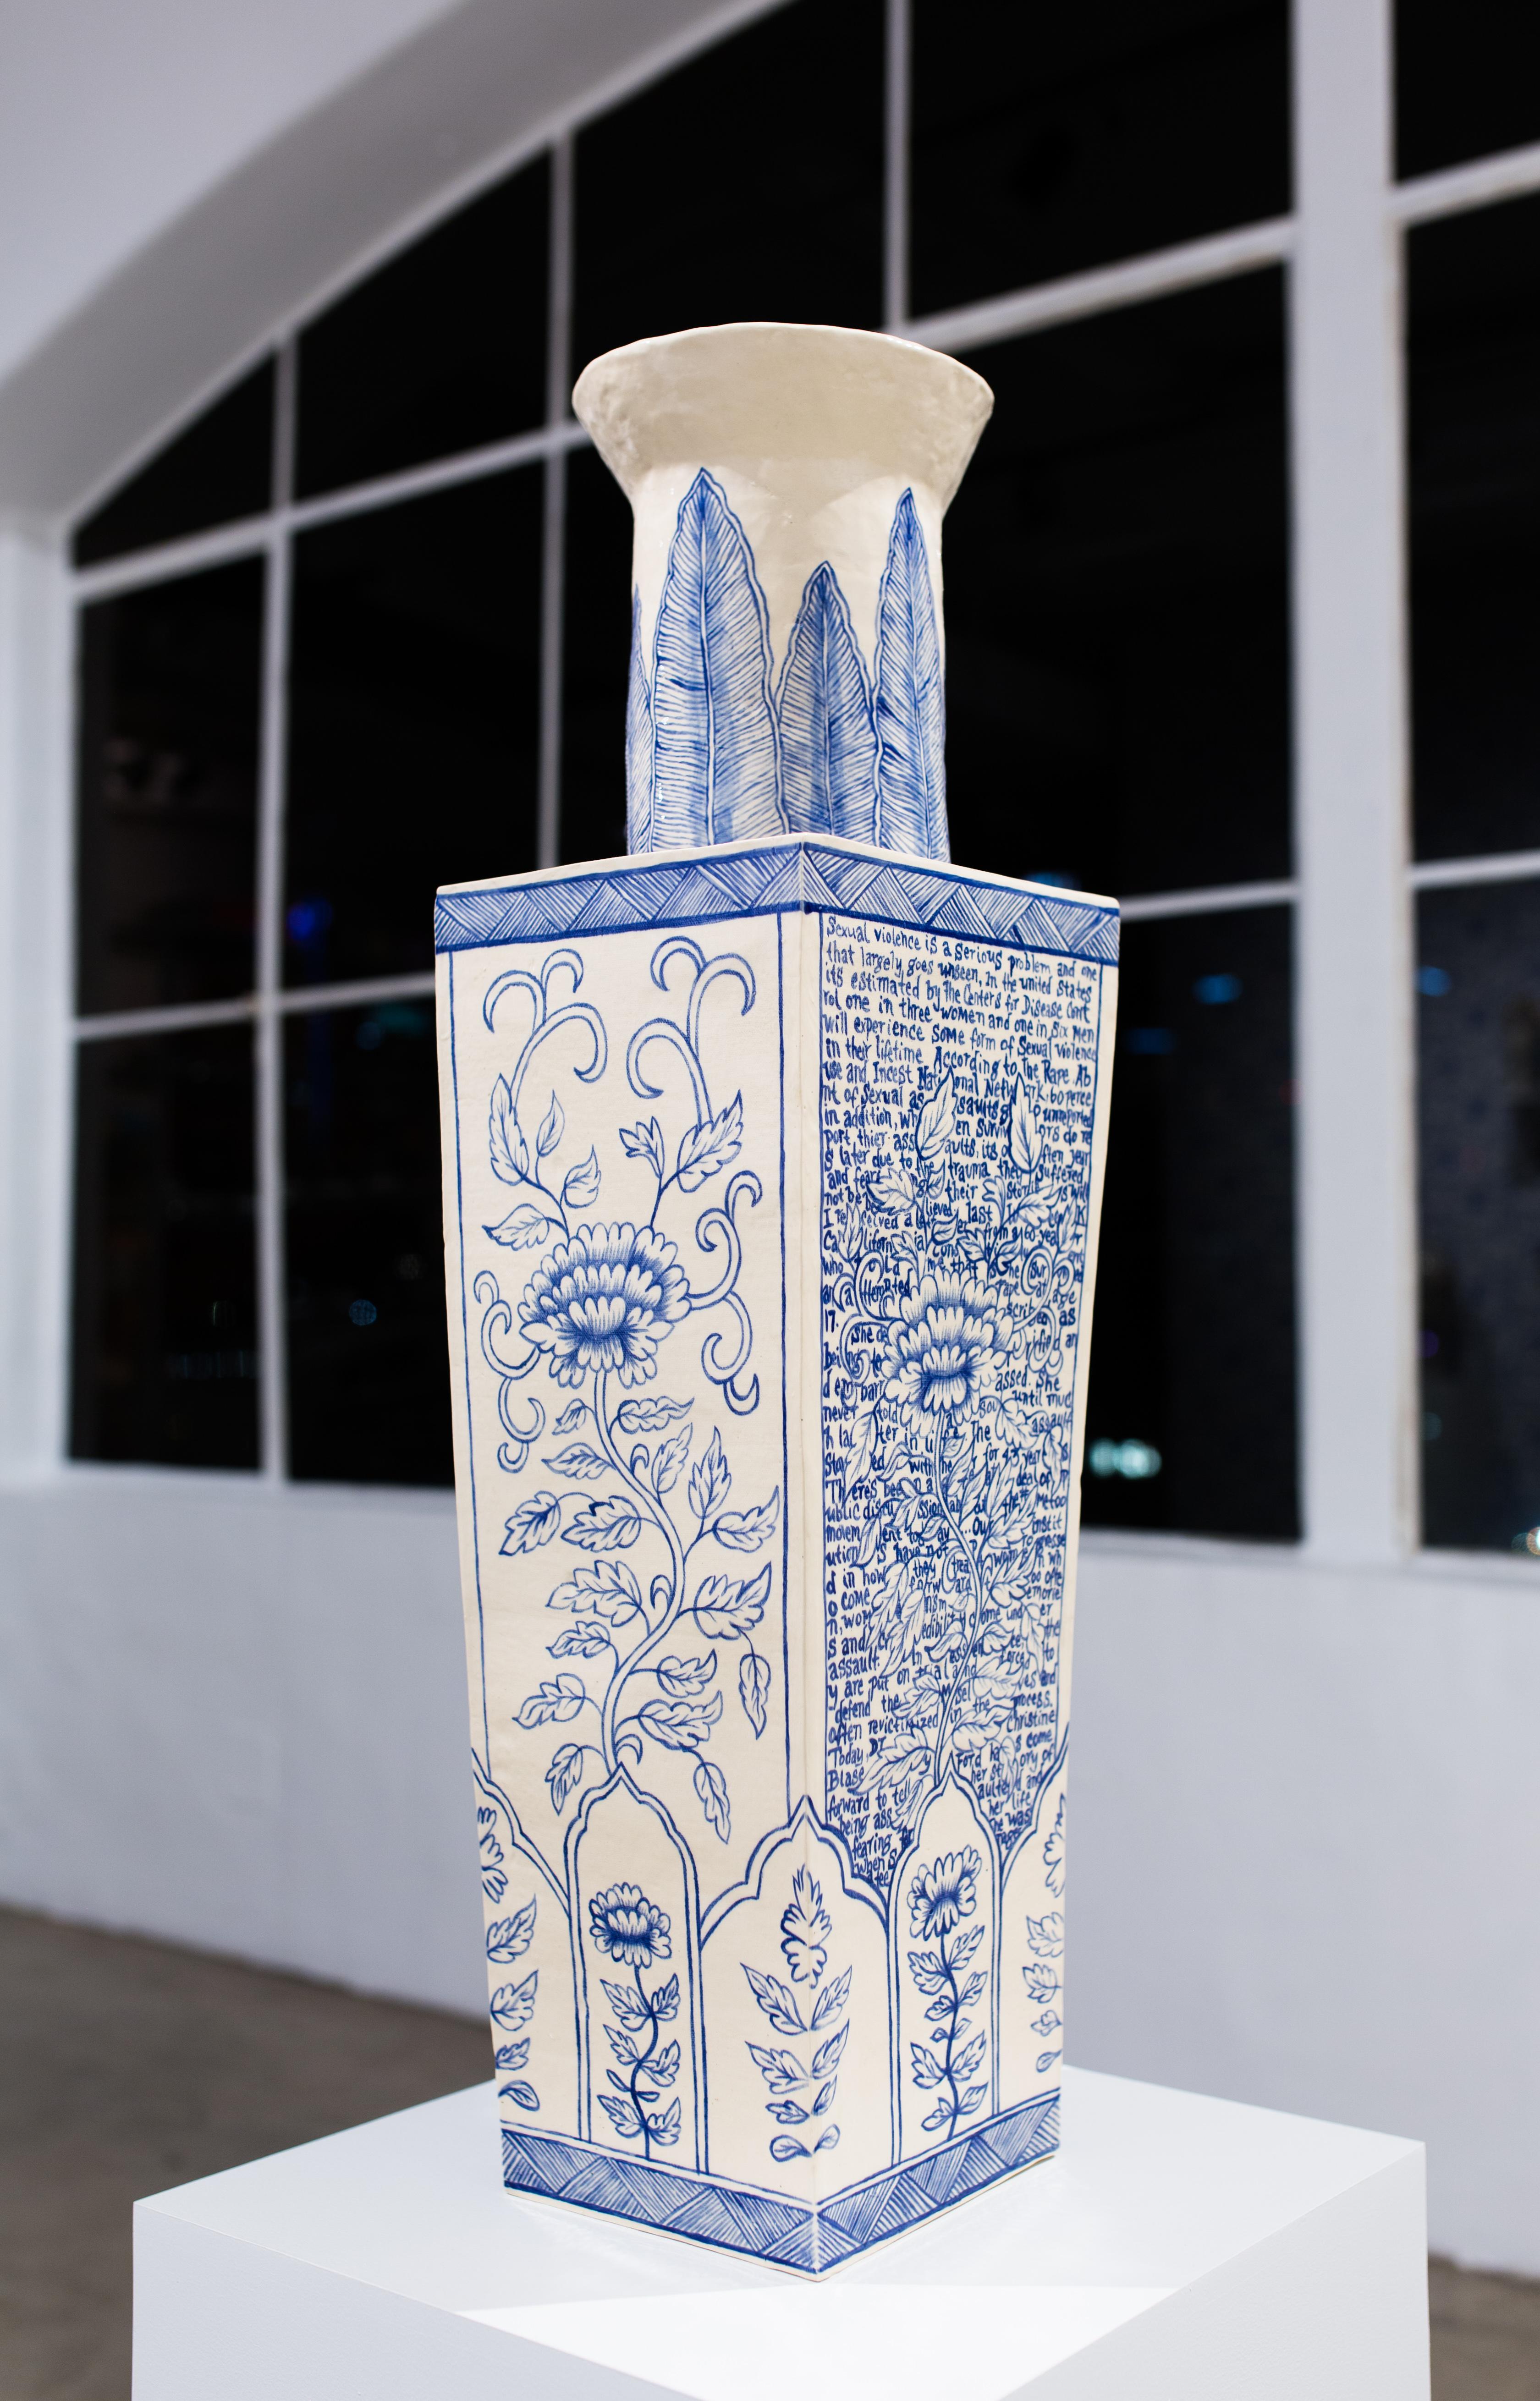 Testimony, 2019
Ceramic vase in two parts with glazes
33 x 9 ½ x 9 ½ inches
$8,000 

Currently in exhibition thru November 2nd.

In Elyse Pignolet’s solo exhibition, “You Should Calm Down” she presents a new body of work that includes items of the